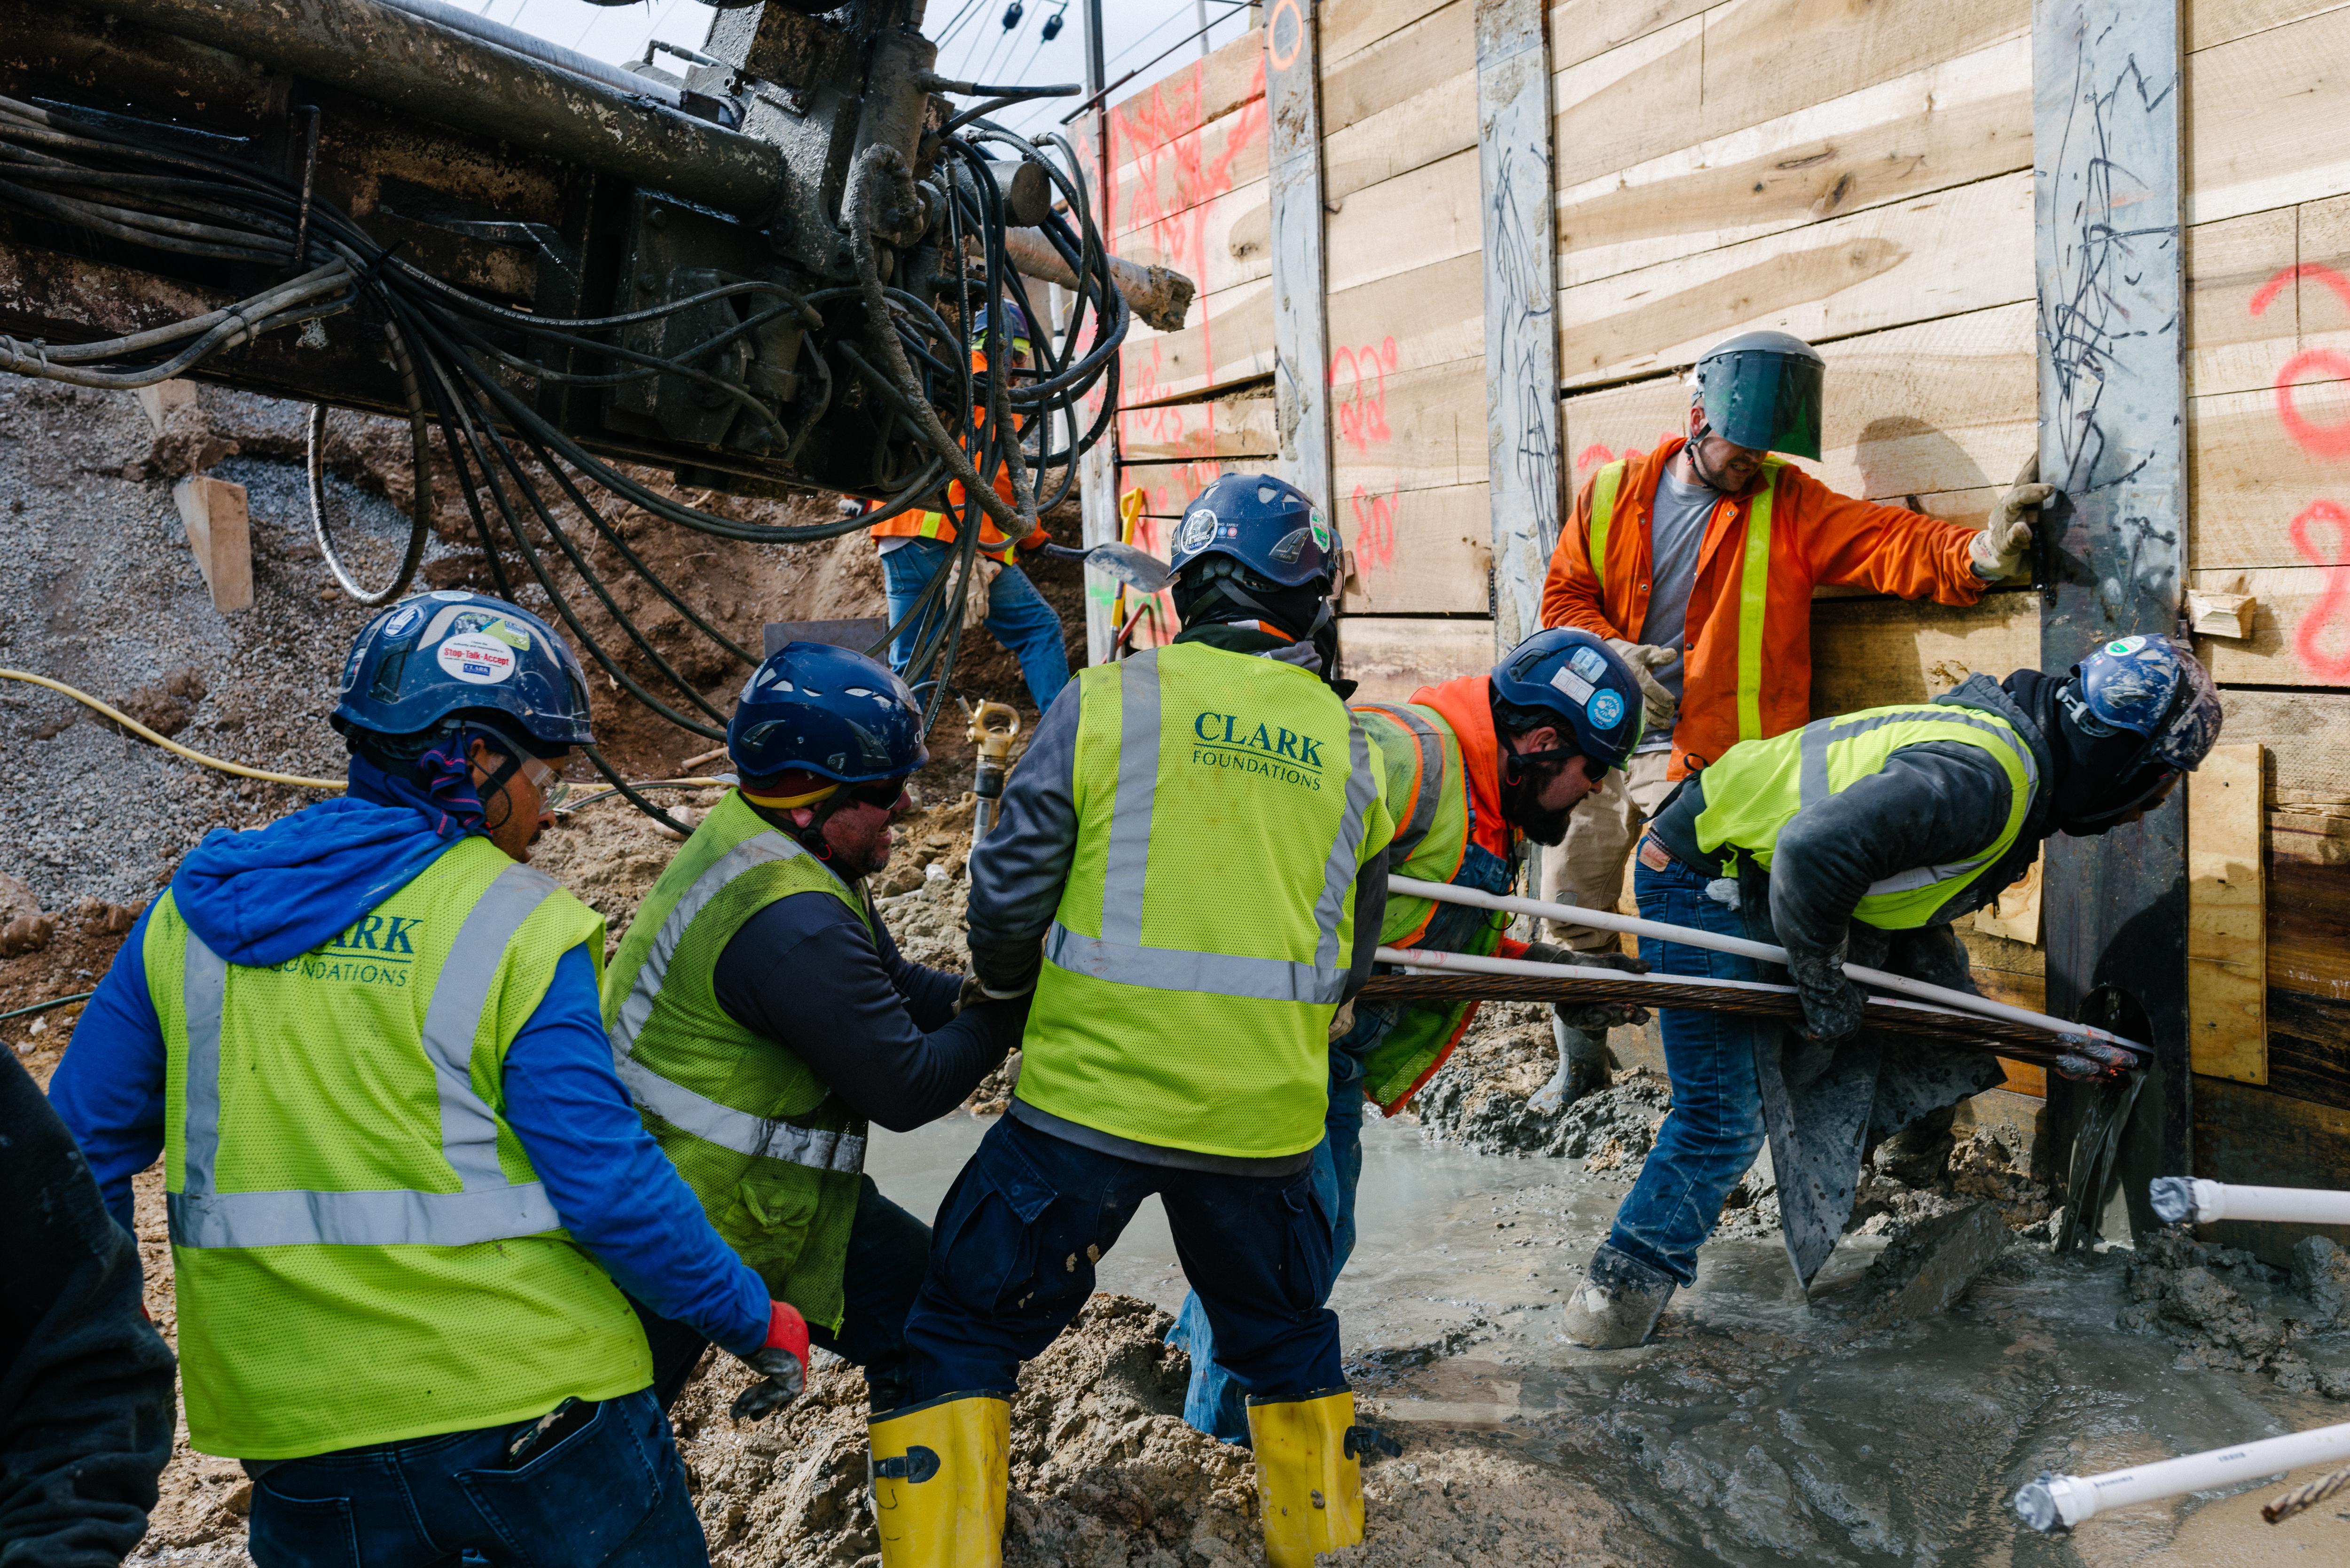 Clark Foundations team members work on the Armature Works project in Washington, DC.